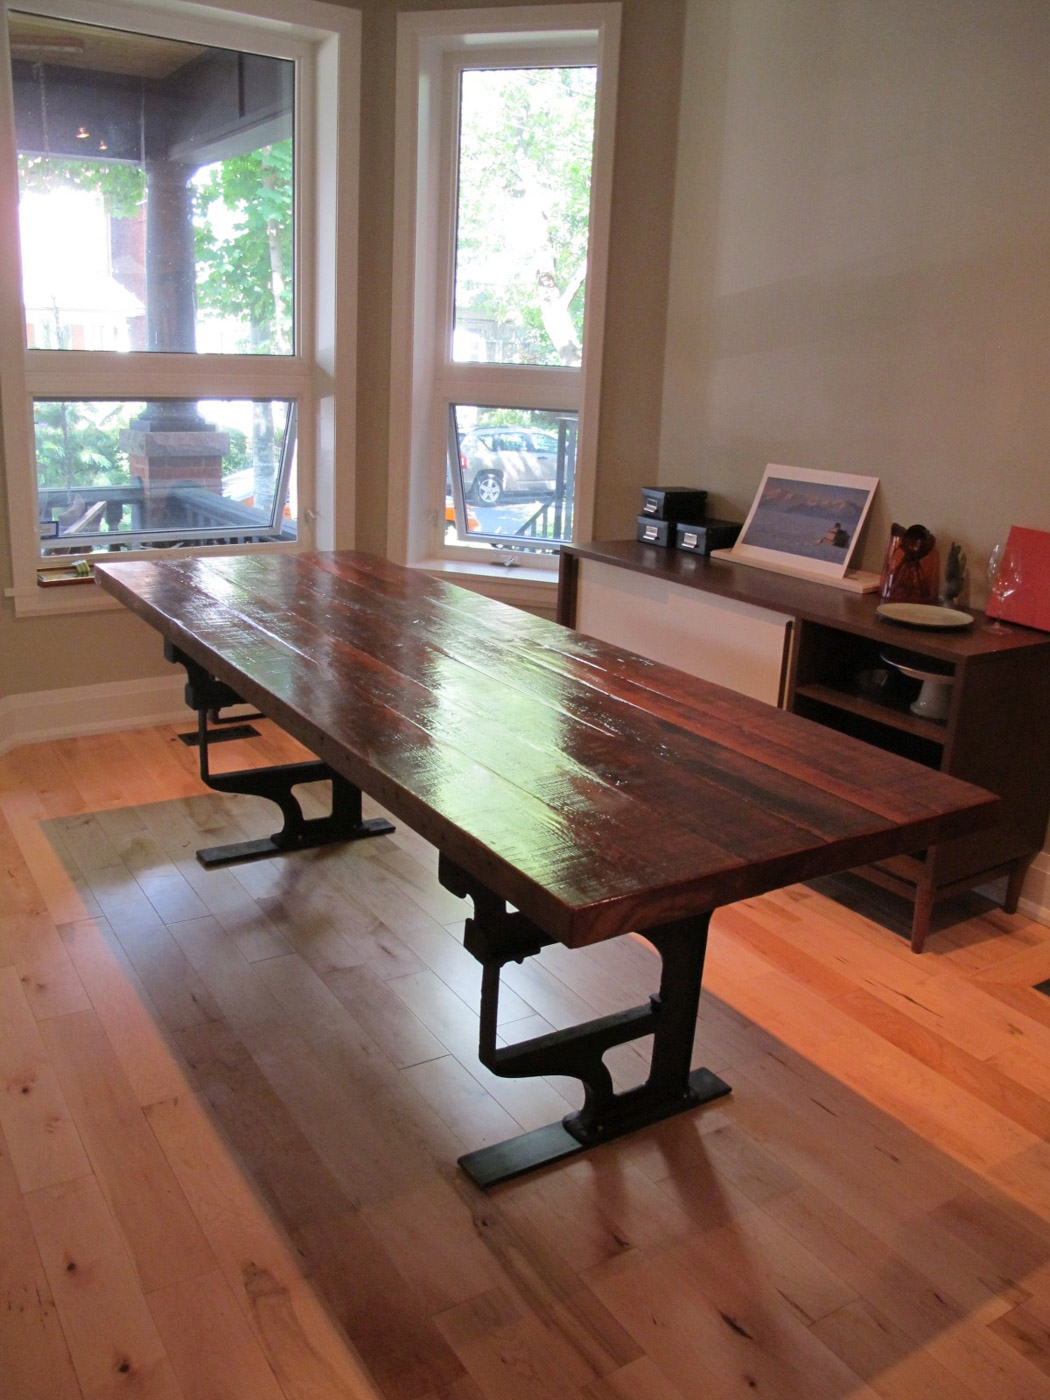 BeReclaimed - Reclaimed Wood Table - Southern Yellow Pine with Architectural Salvaged Cast Iron Legs - Annex Toronto.jpg